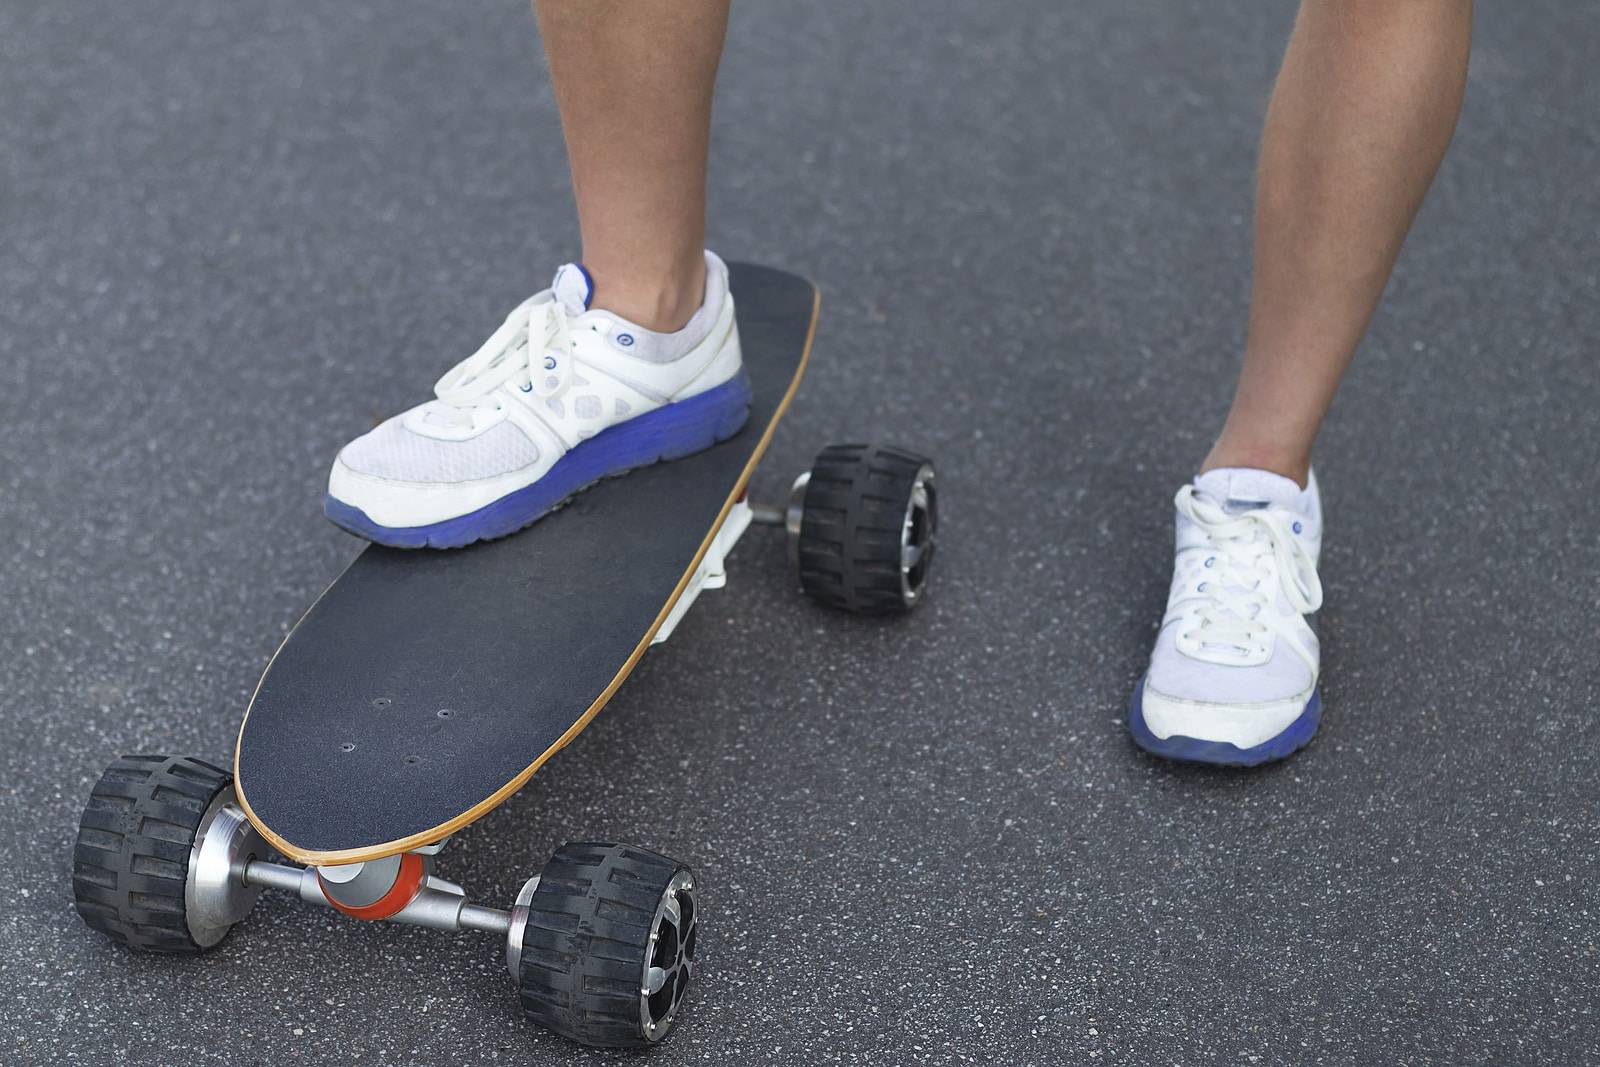 Unique Places You Can Ride an Electric Skateboard 1